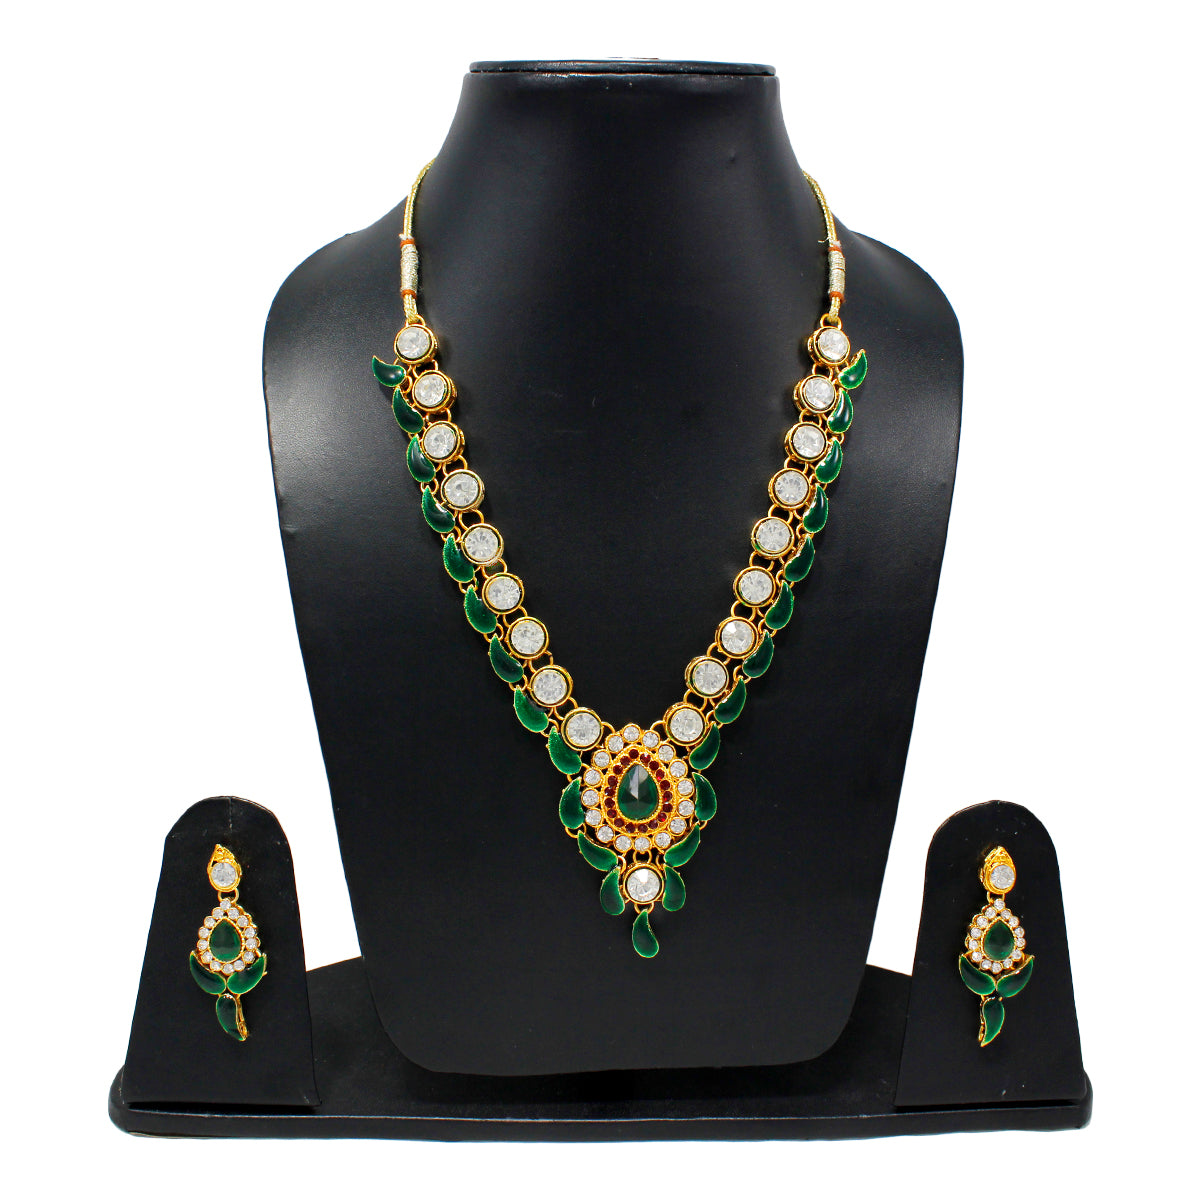 Royal Rani Har Design Necklace and Earrings with White Green Stones